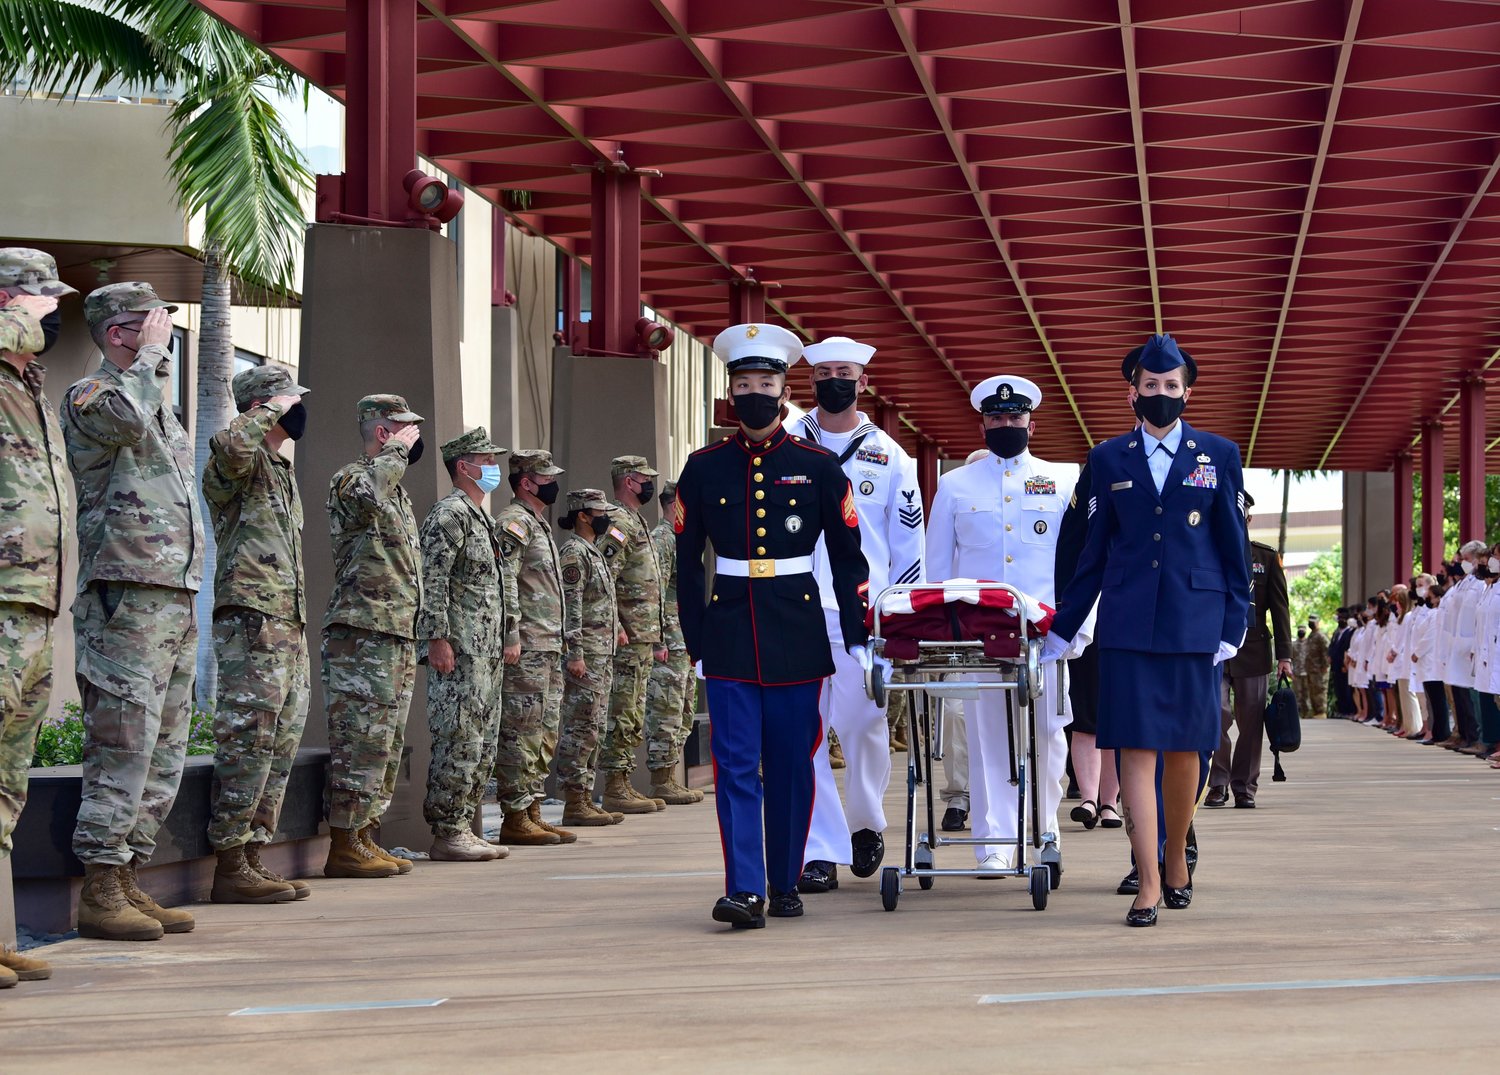 Members of the Defense POW/MIA Accounting Agency render honors Sept. 21, 2021, during a chain of custody event at Joint Base Pearl Harbor-Hickam, Hawaii, for the recently identified remains of Father Emil J. Kapaun, a Wichita, Kan., diocesan priest who laid down his life as a military chaplain during the Korean War.